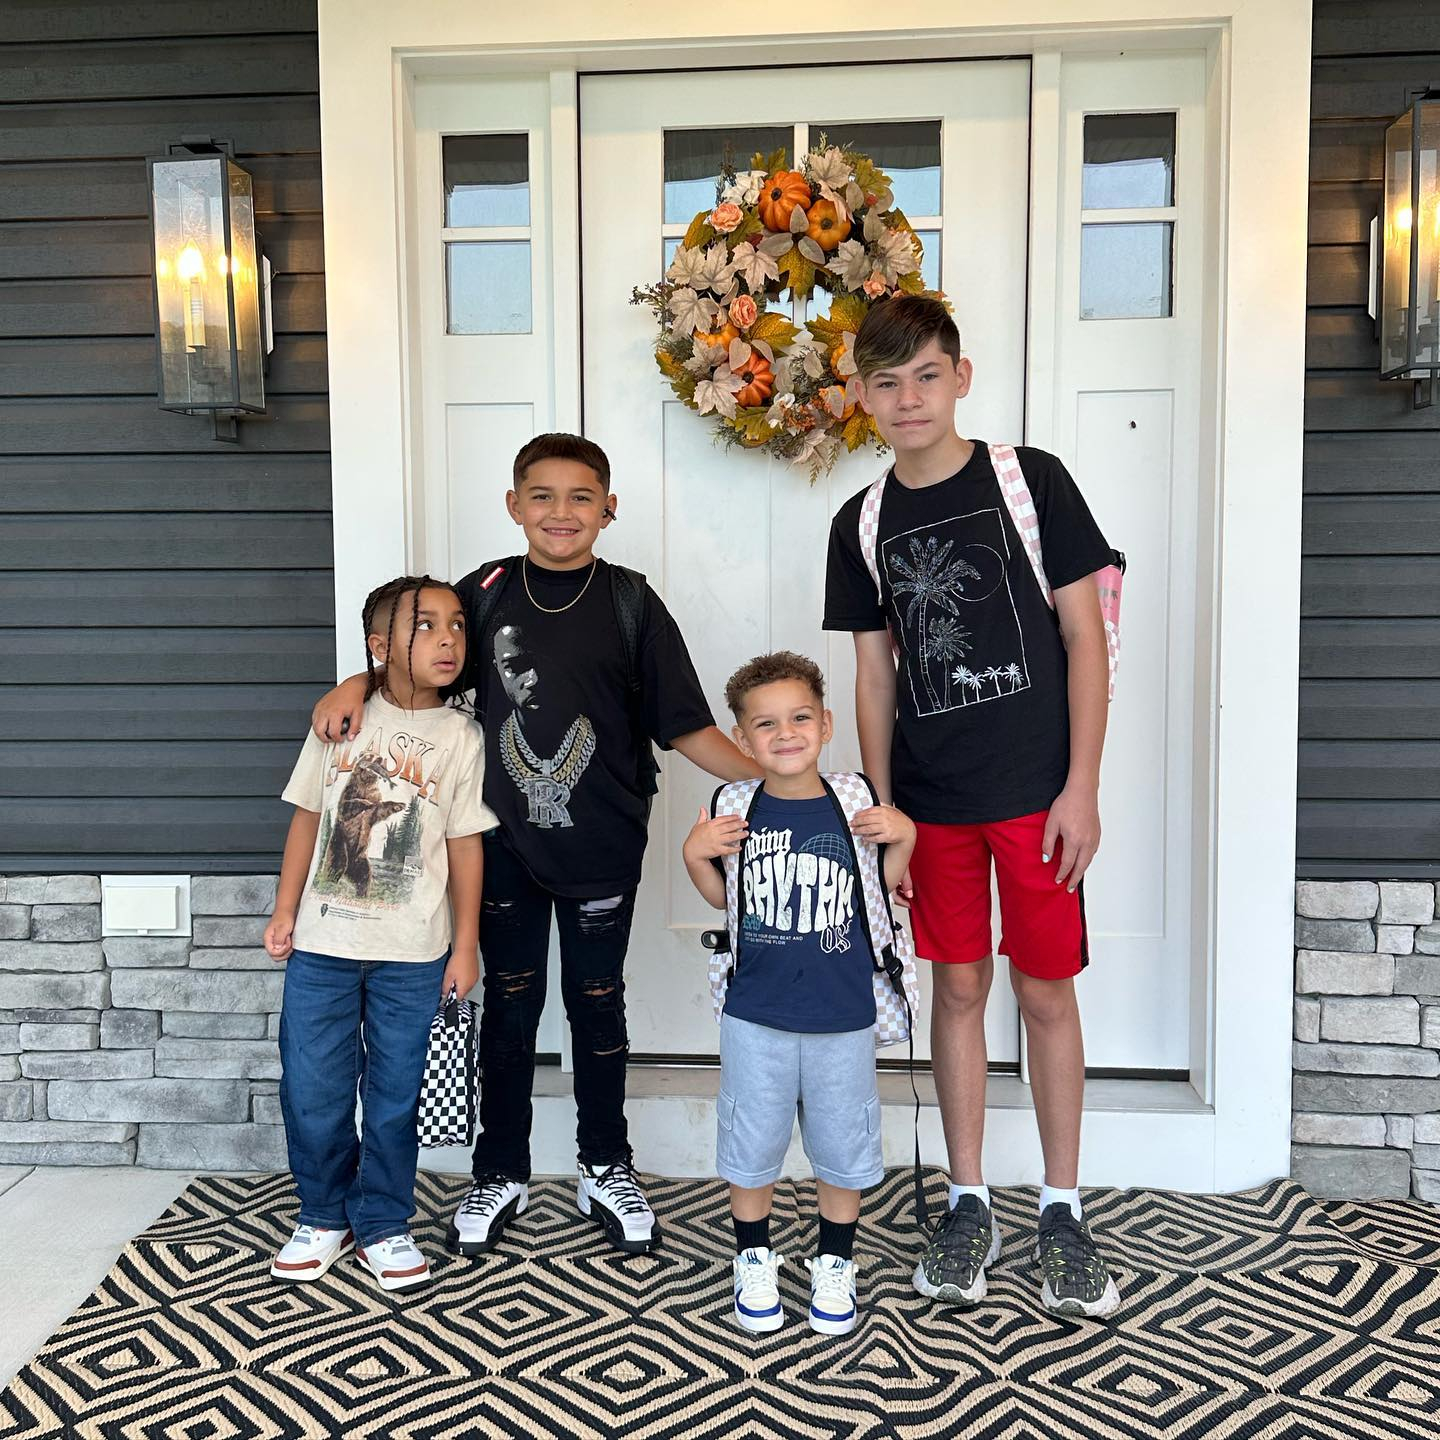 Kailyn is also a mom to sons: Isaac, Lincoln, Lux, Creed, and Rio (not pictured)